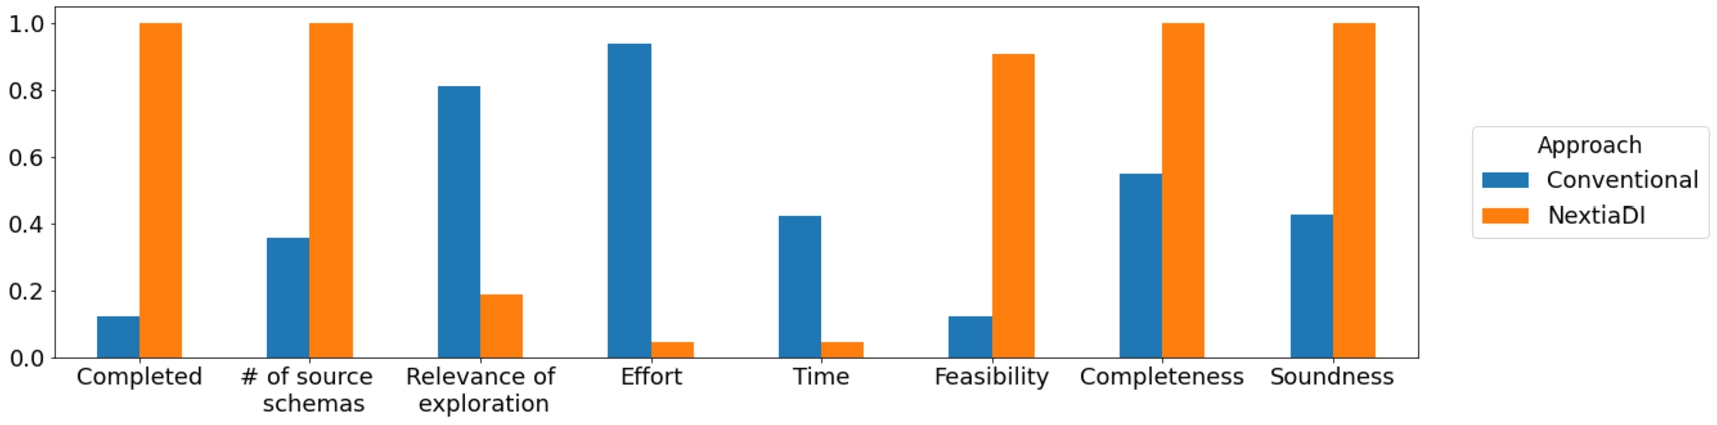 Aggregated results for the bootstrapping phase. Completed specifies whether participants finished the task within the available time (higher is better). # of source schemas denotes how many schema elements participants managed to bootstrap in the available time (higher is better). Relevance of exploration denotes the need a participant perceived to explore the structure of the sources to conduct the activity (lower is better). Effort and Time specifies, respectively, the perceived effort and time to complete the task (lower is better). Feasibility is used to quantify the perceived feasibility of running the task with the approach at hand (higher is better). Completeness and Soundness refer to the quality metrics previously introduced.